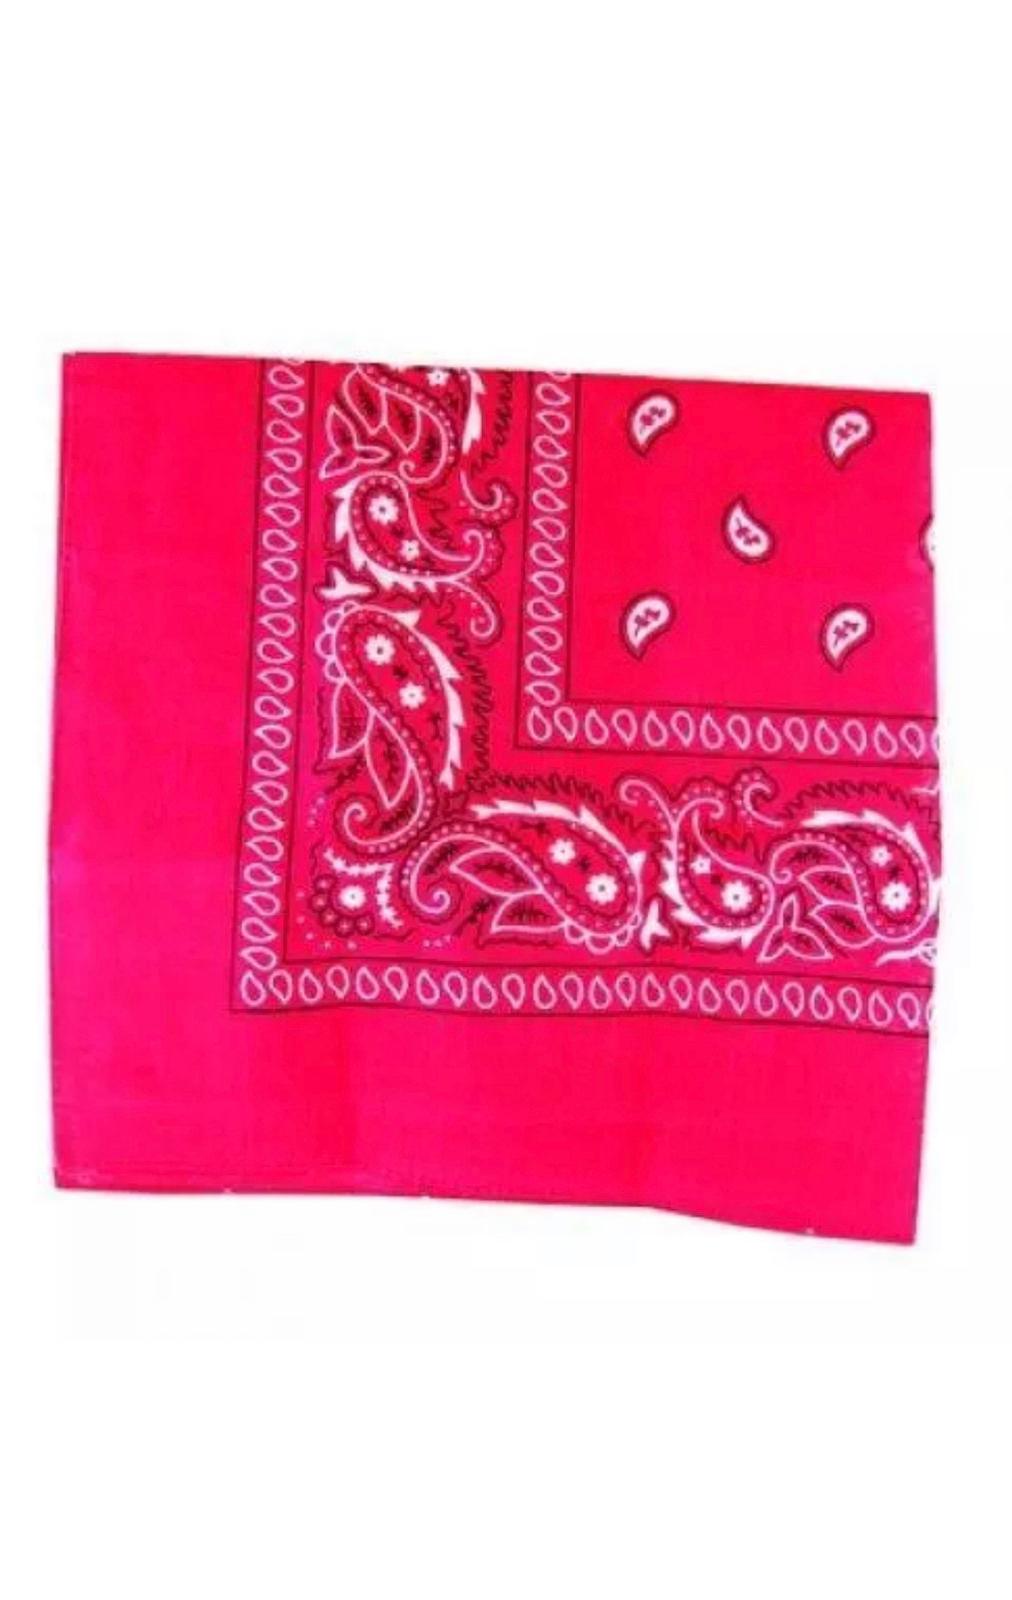 Paisley Cotton Bandana 50 Dozen With Assorted colors in box